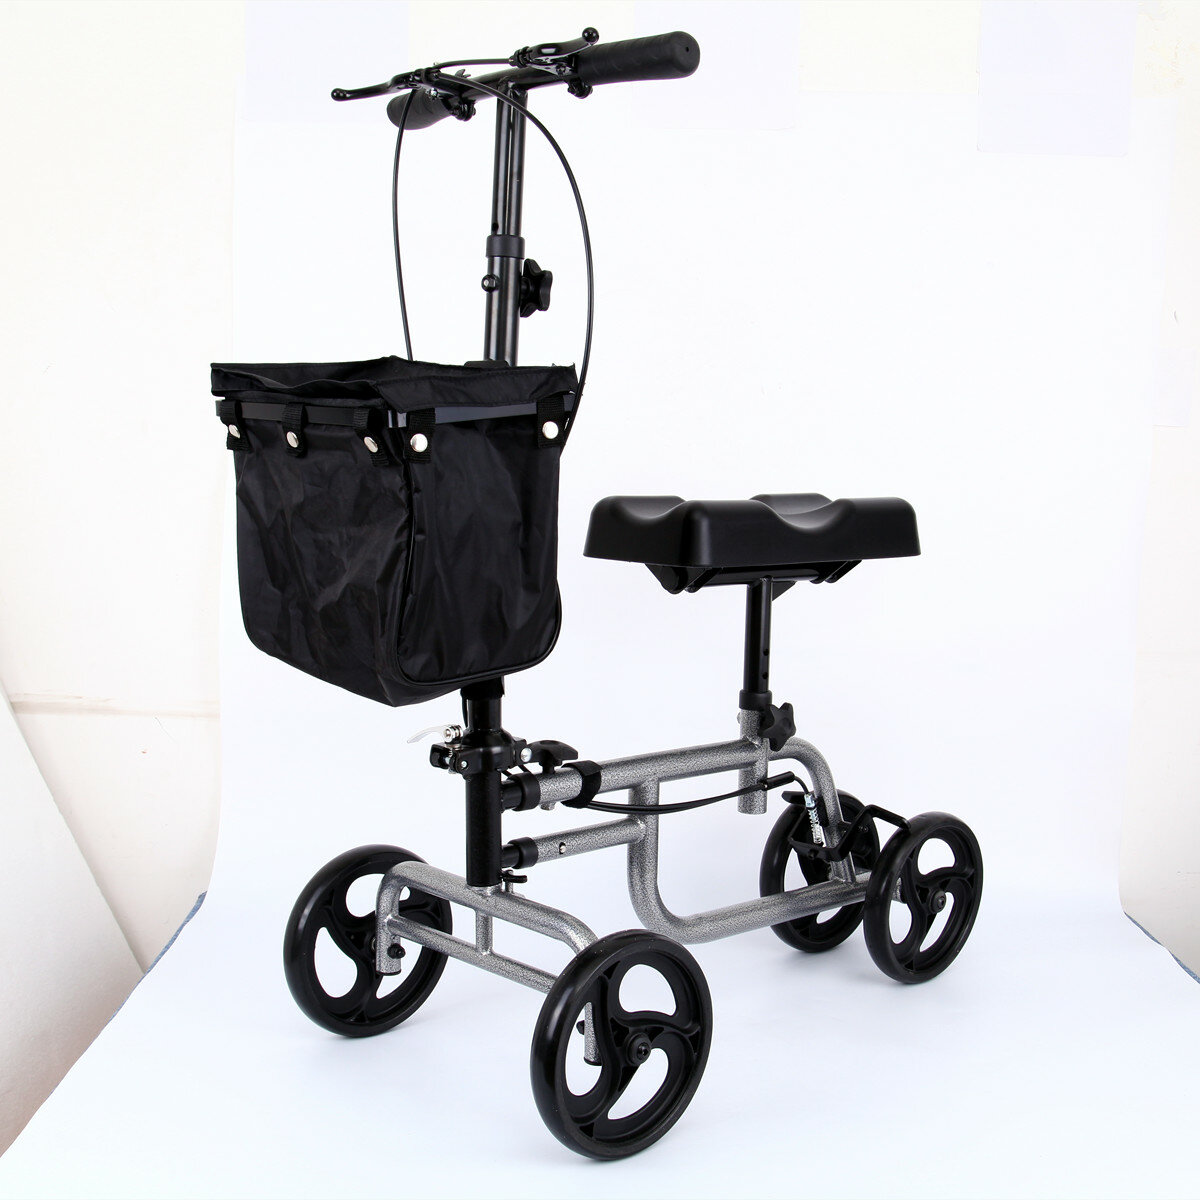 Knee Walker Scooter Foldable Adjusted Height Walking Aid Knee Support and Basket